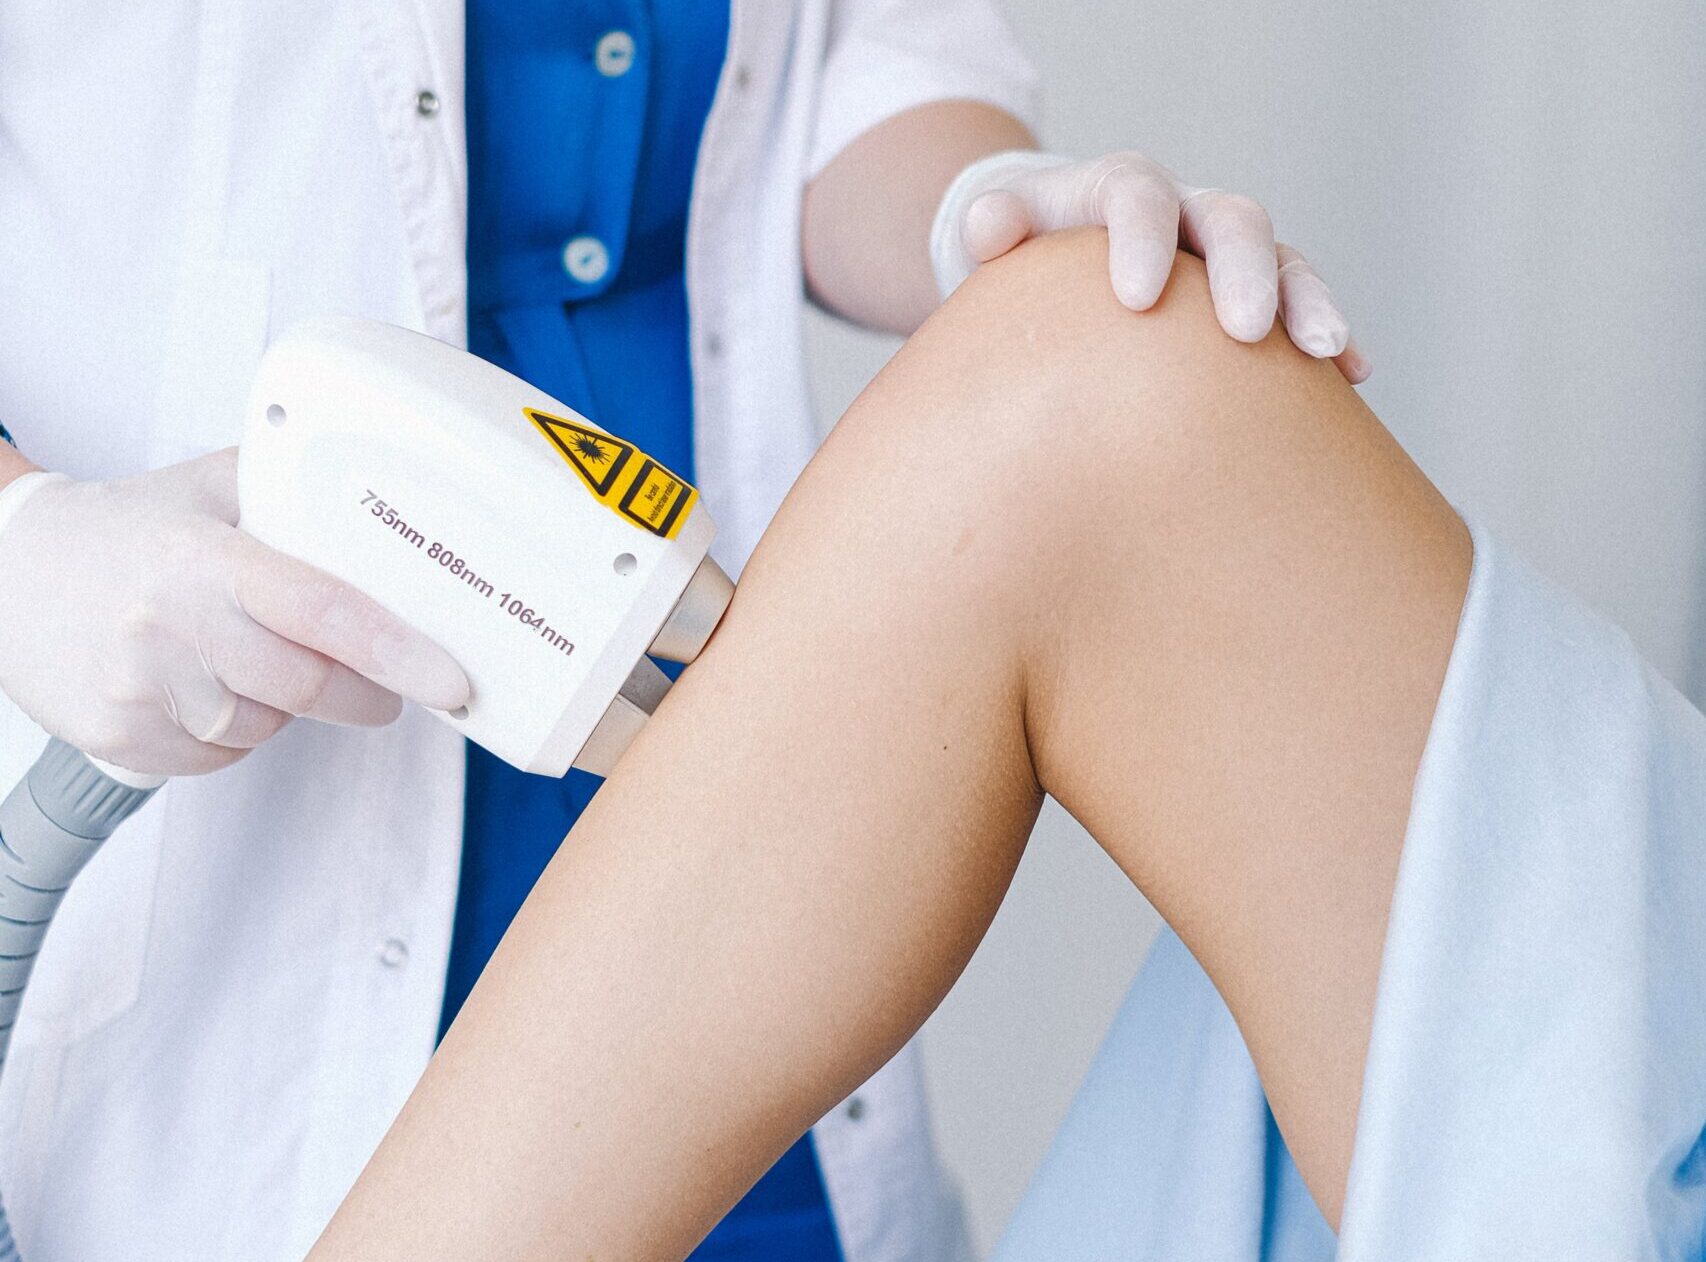 professional laser hair removal machines